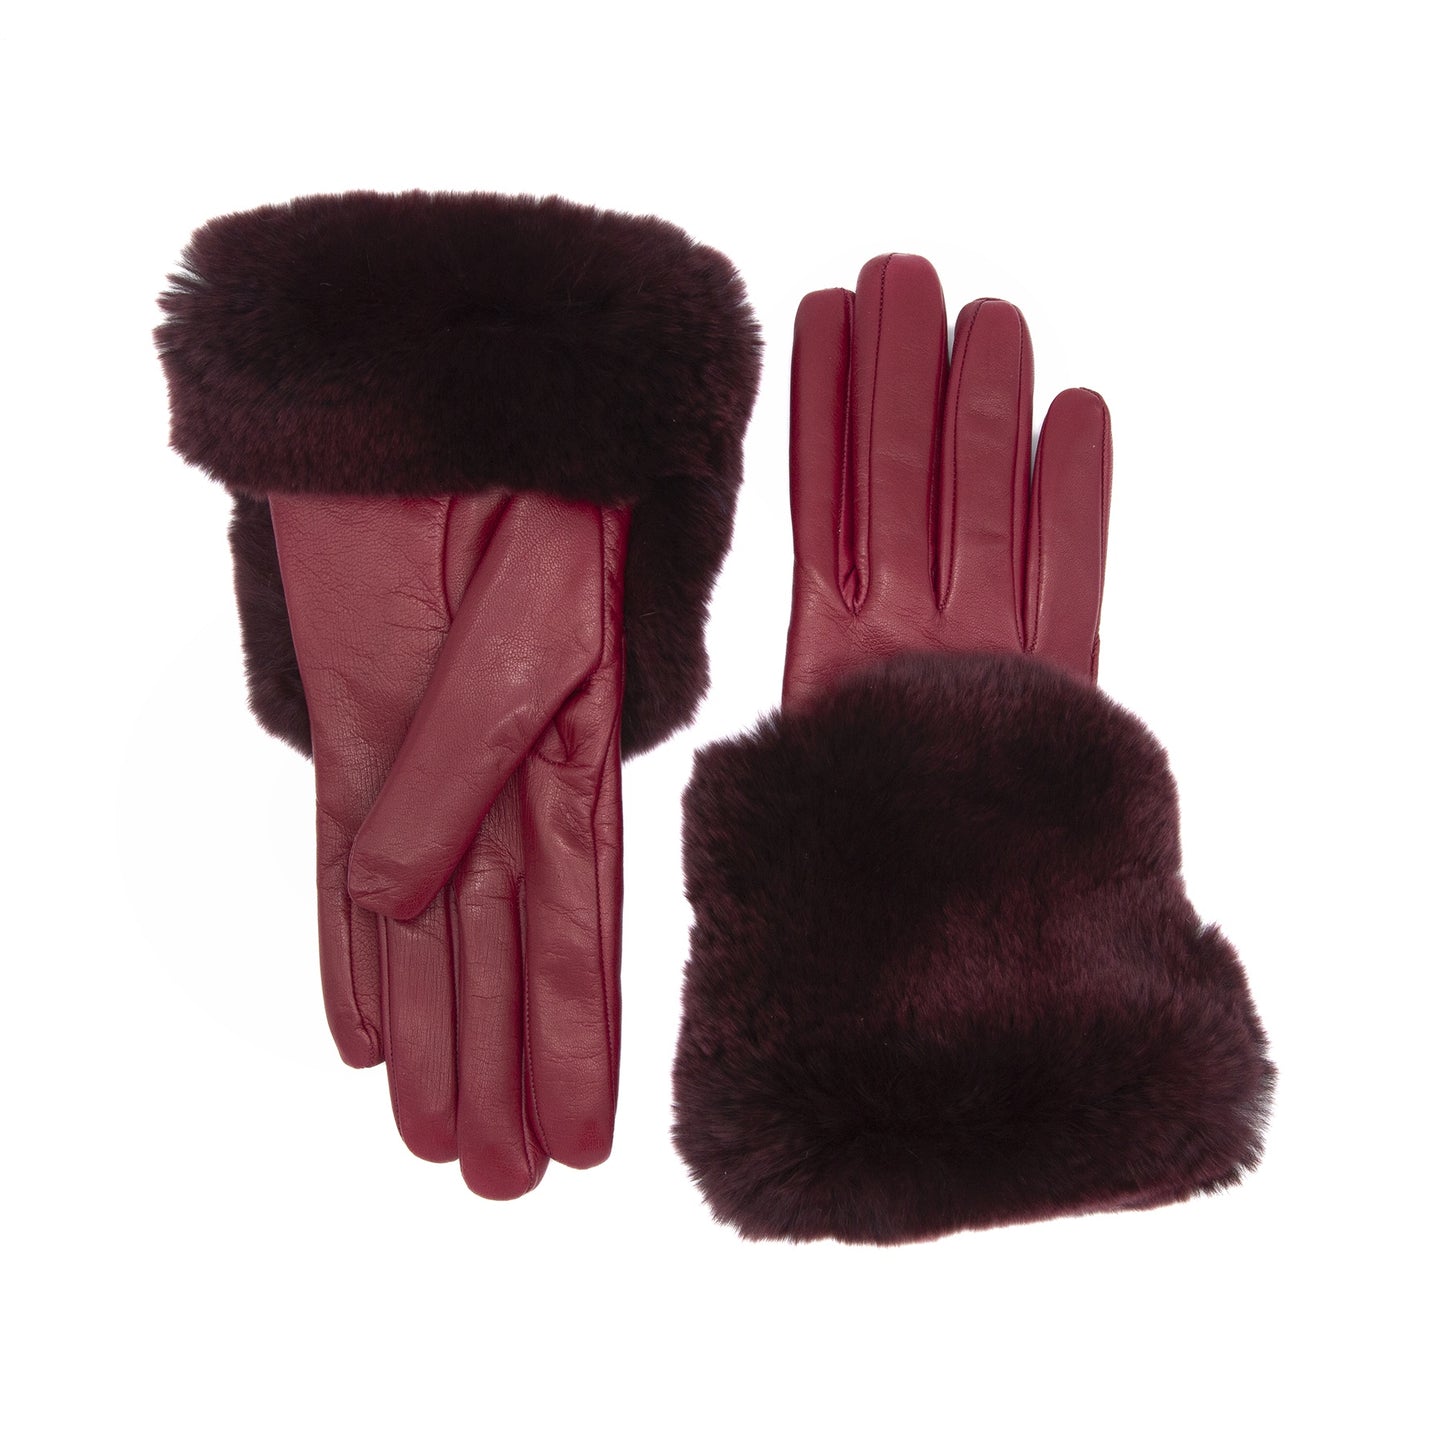 Women's rum nappa leather gloves with a wide real fur panel on the top and cashmere lined